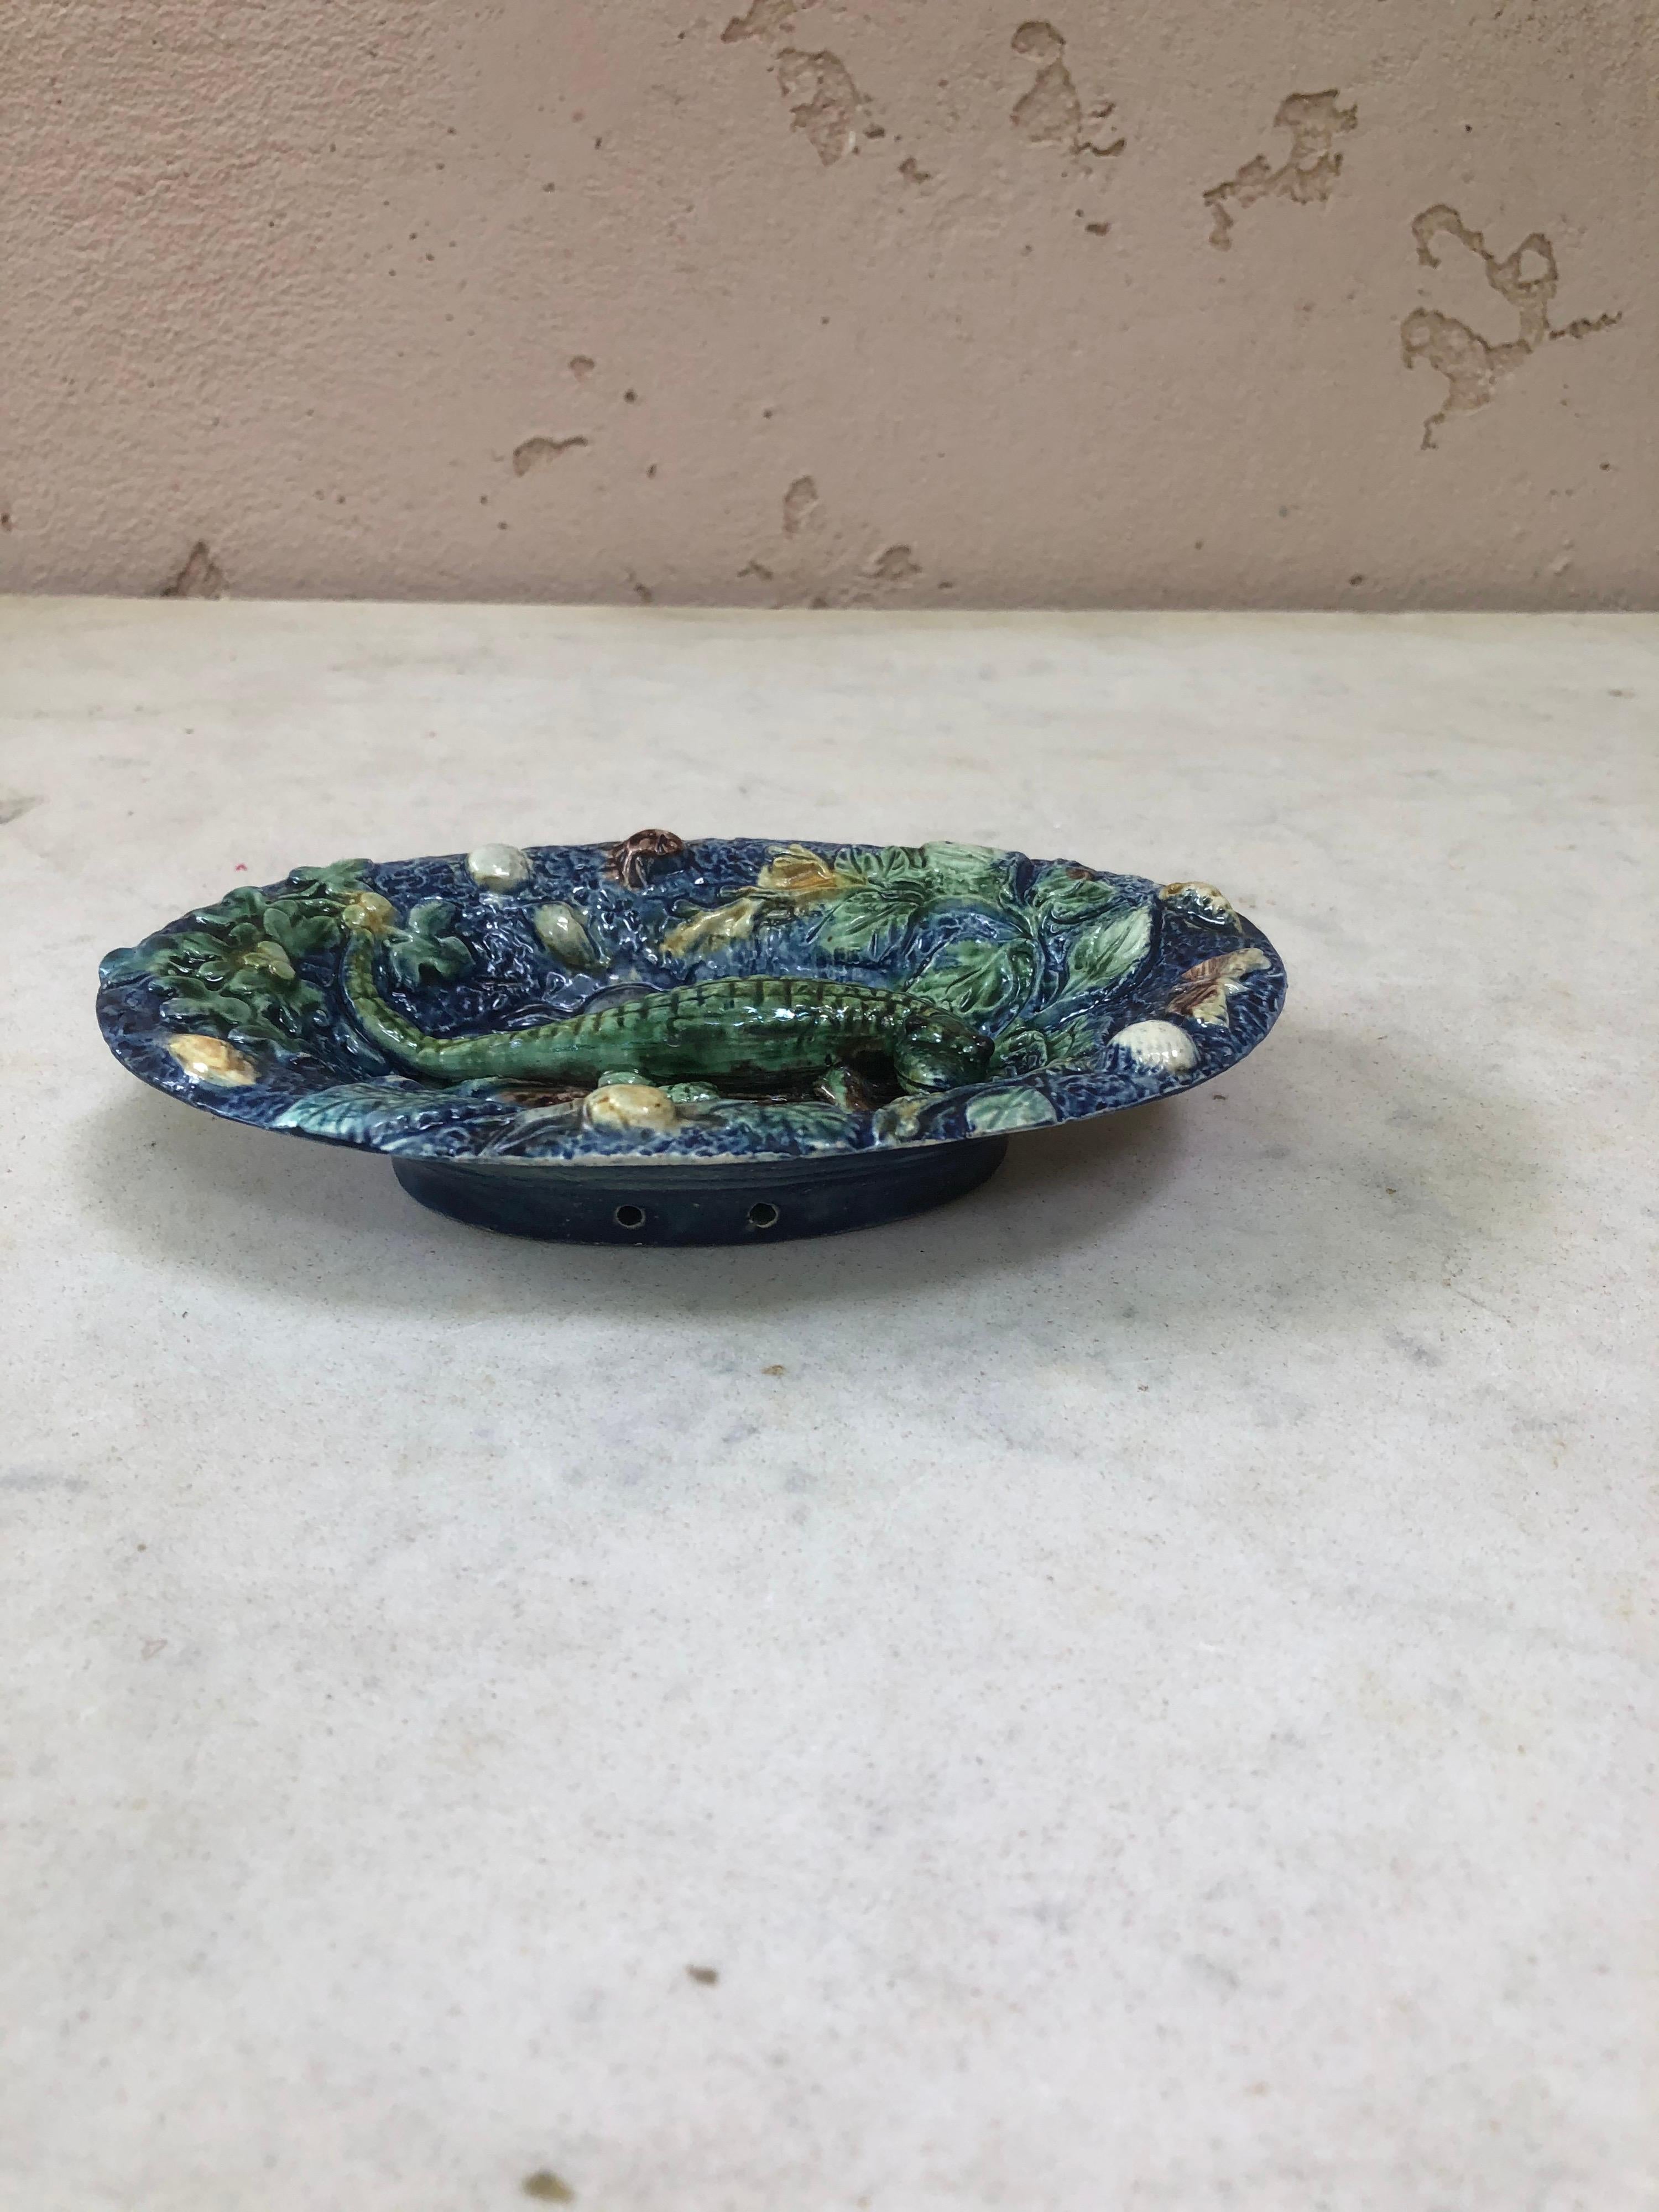 Rare small Palissy platter with alligator, snail, butterfly, shells and plants Thomas Sergent.